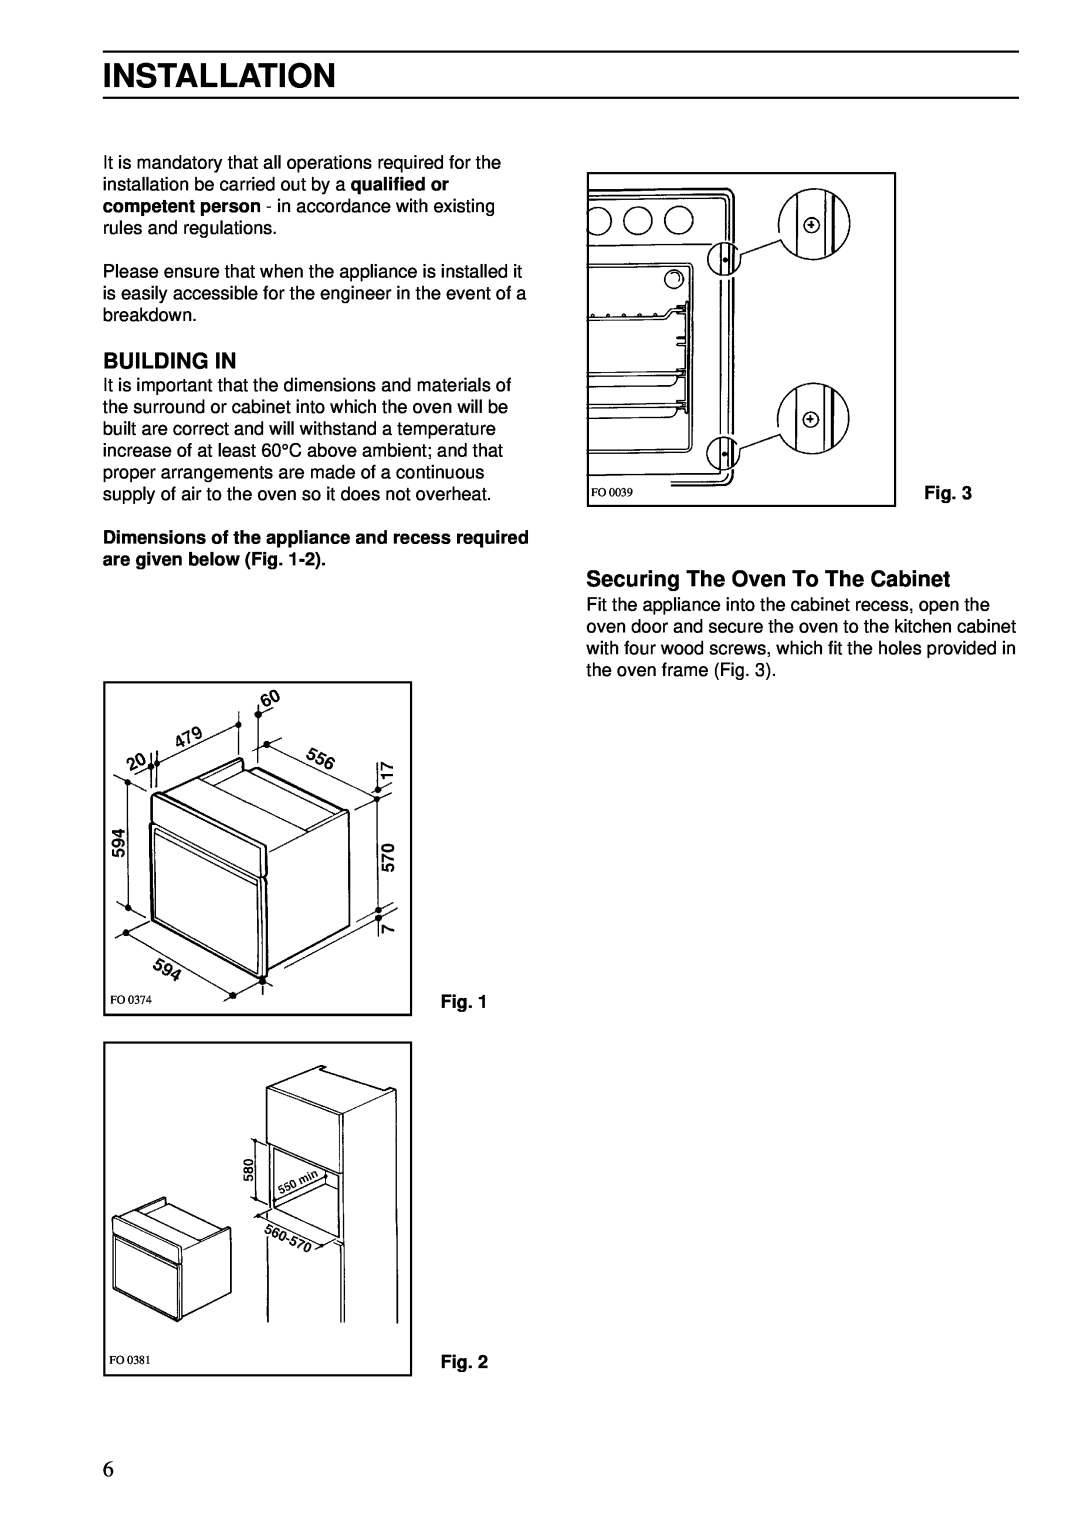 Zanussi ZSA 15 installation manual Installation, Building In, Securing The Oven To The Cabinet 